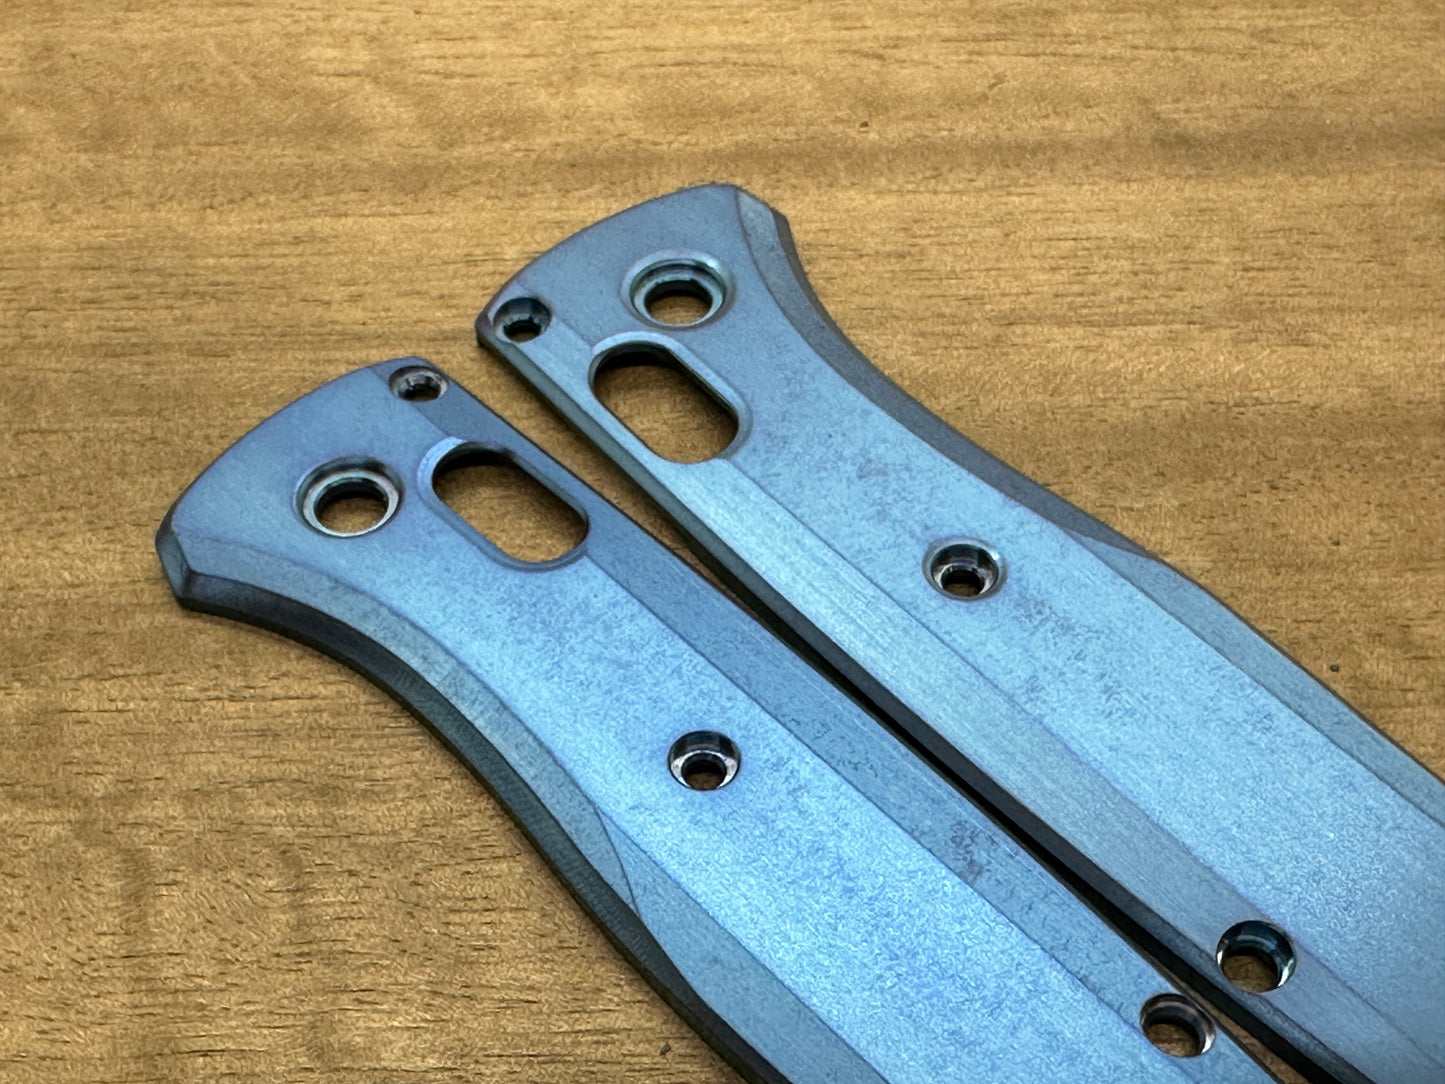 Tumbled BLUE anodized Titanium Scales for Benchmade Bugout 535